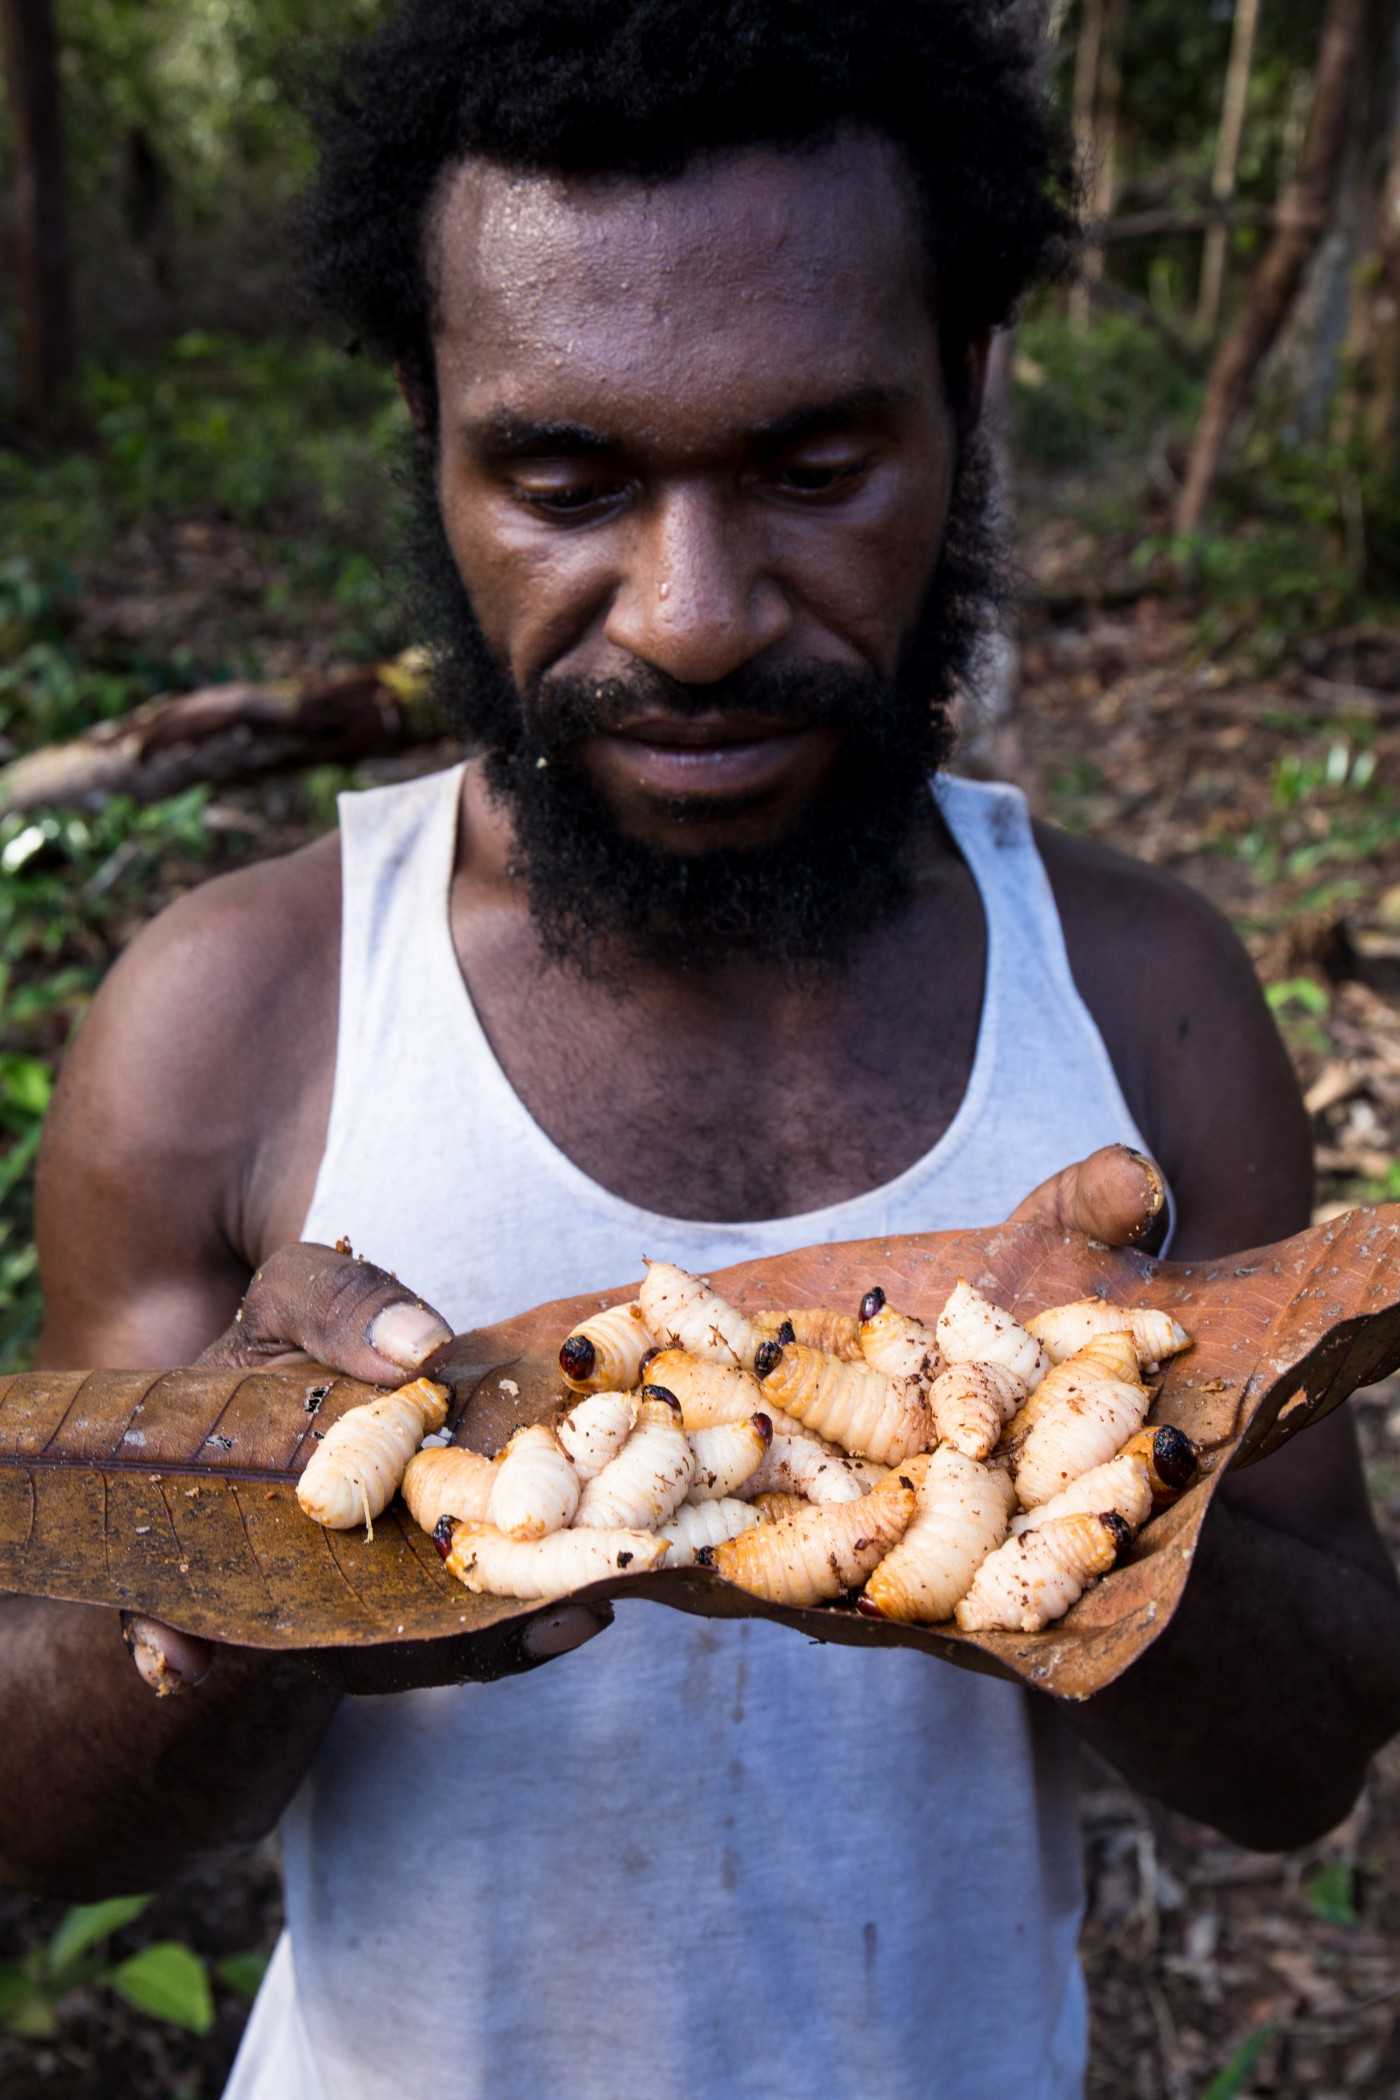 Grubs from sago palms are a prized source of protein for indigenous Papuans.